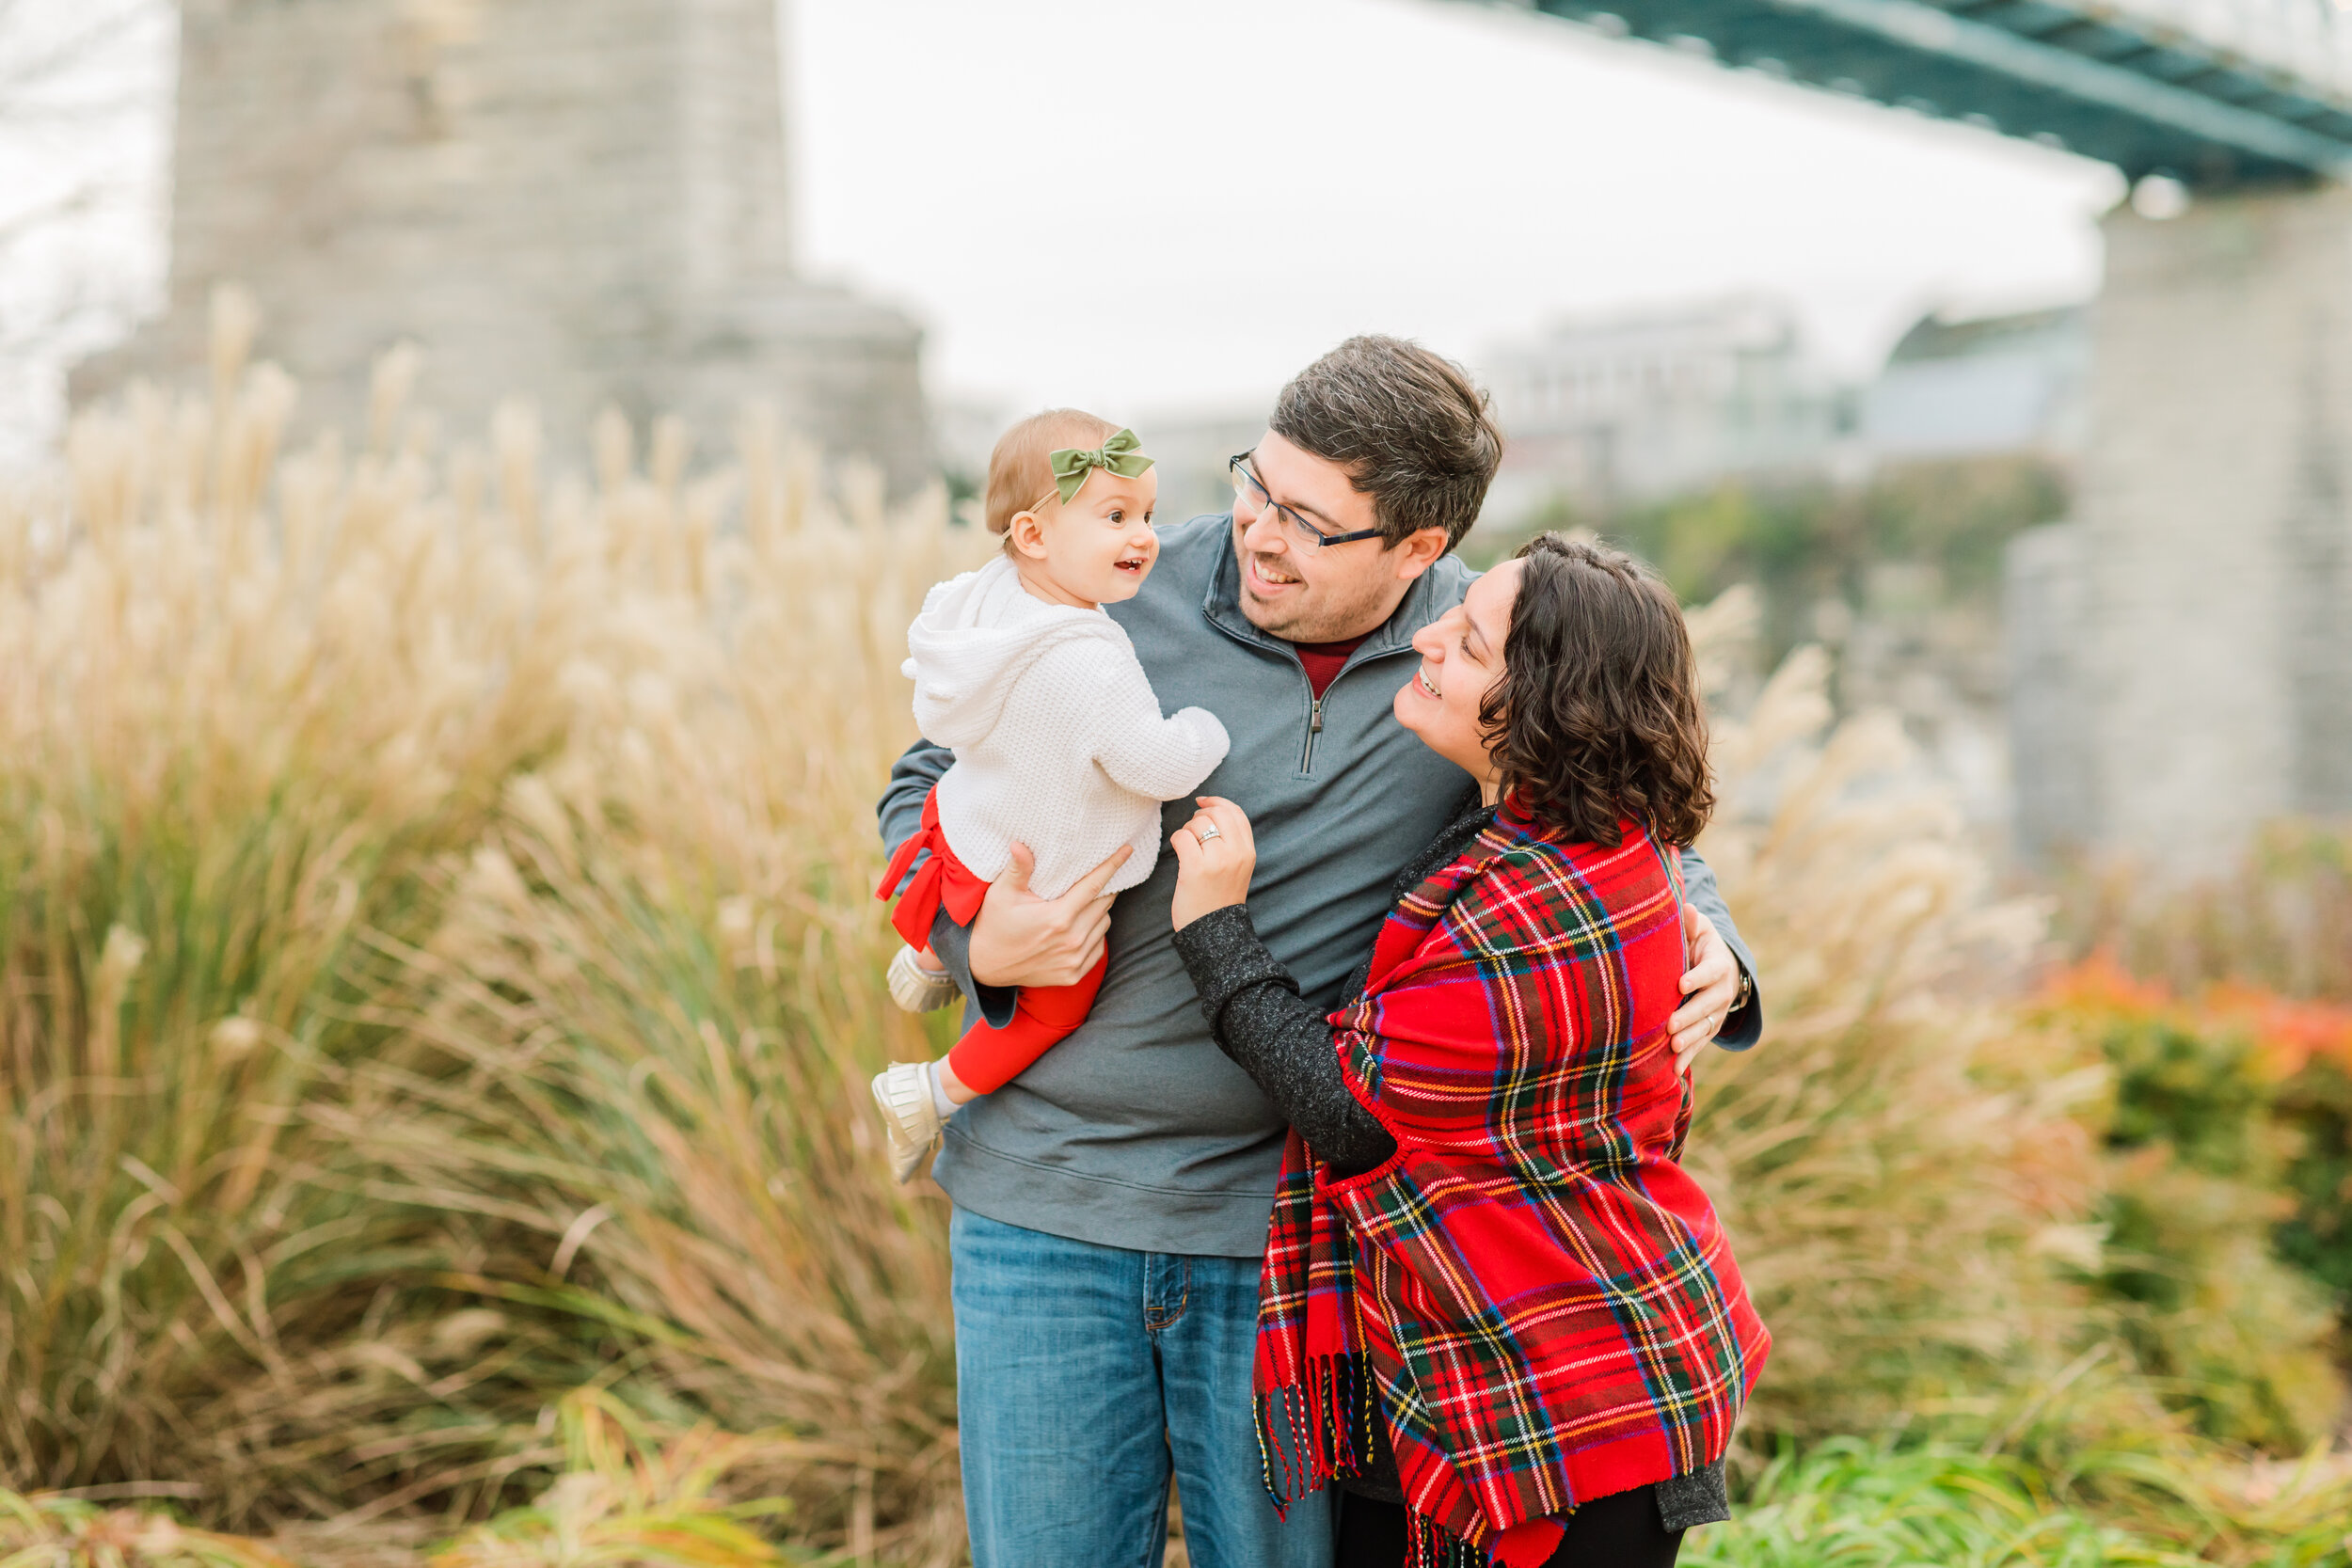 Family_Session_Chattanooga_TN_Emily_Lester_Photography-4.jpg